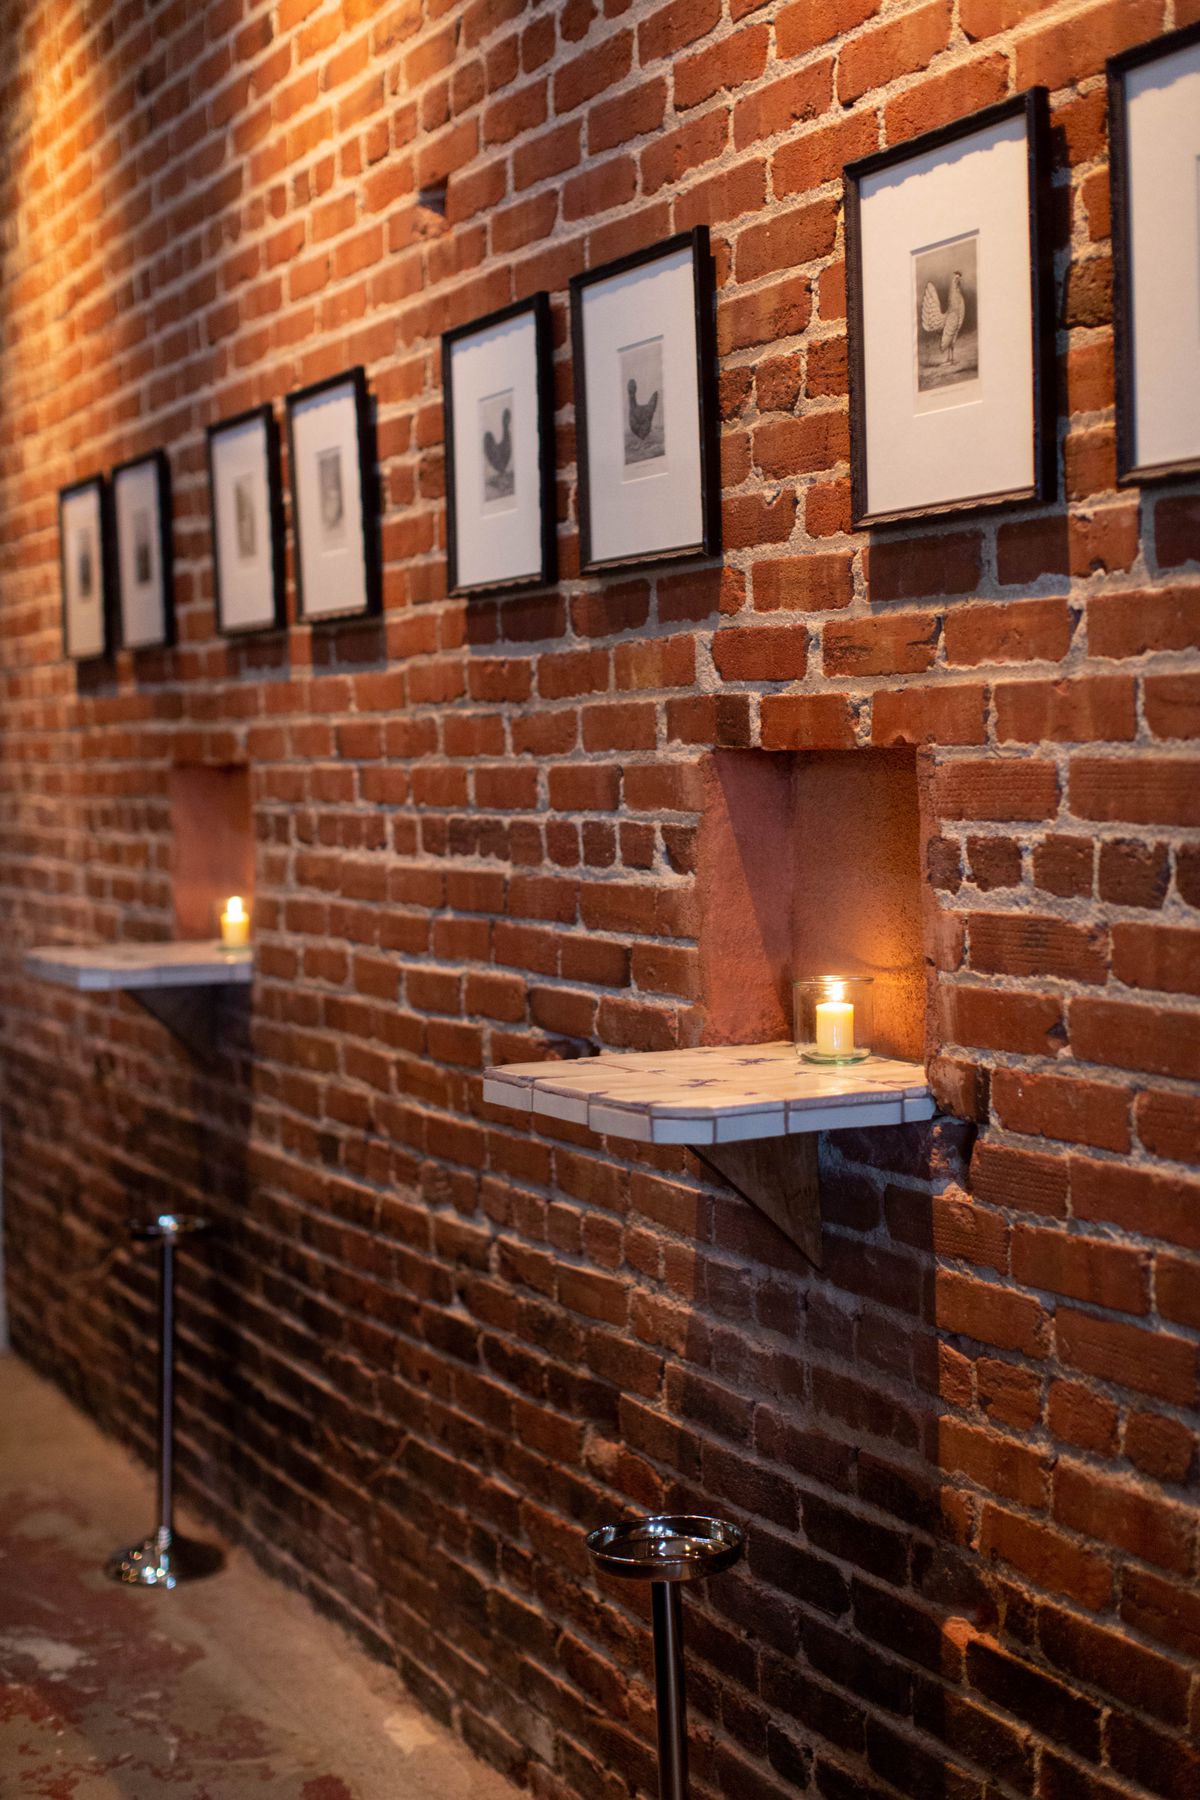 A brick wall with nooks for holding drinks in a new restaurant.